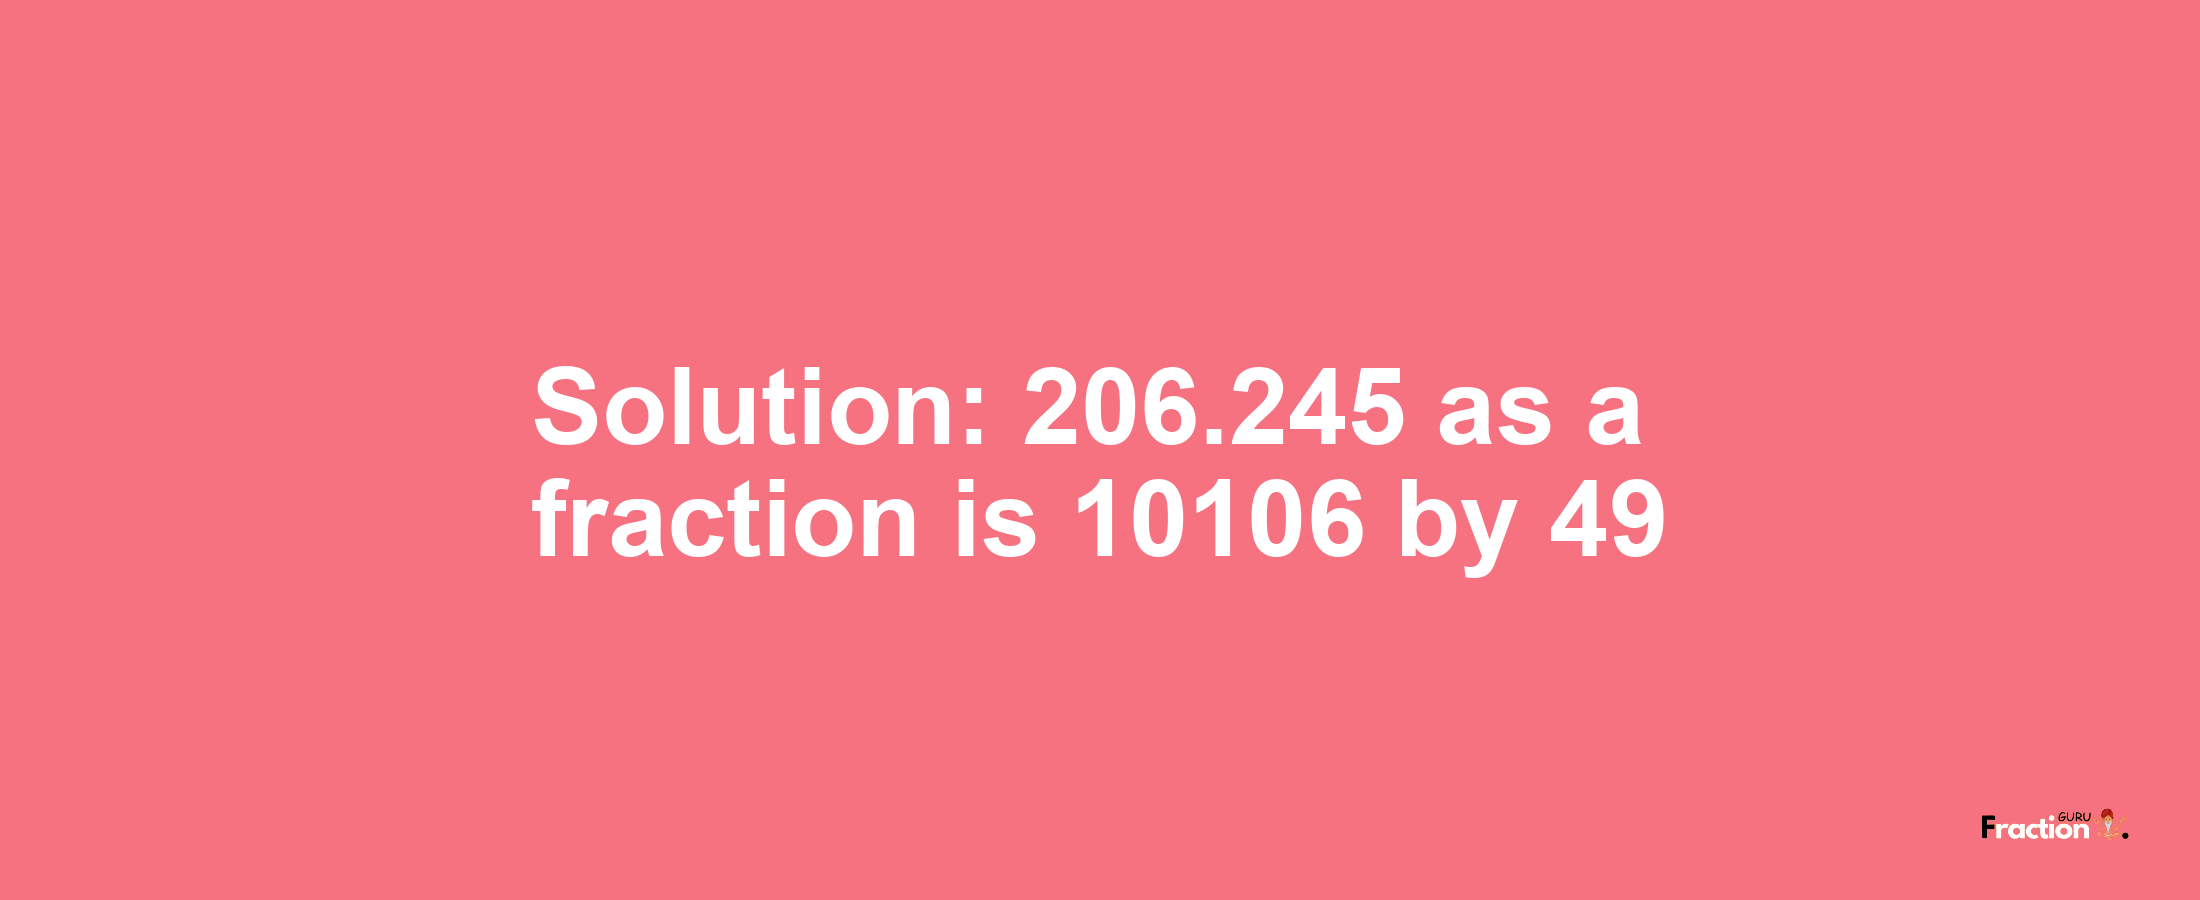 Solution:206.245 as a fraction is 10106/49